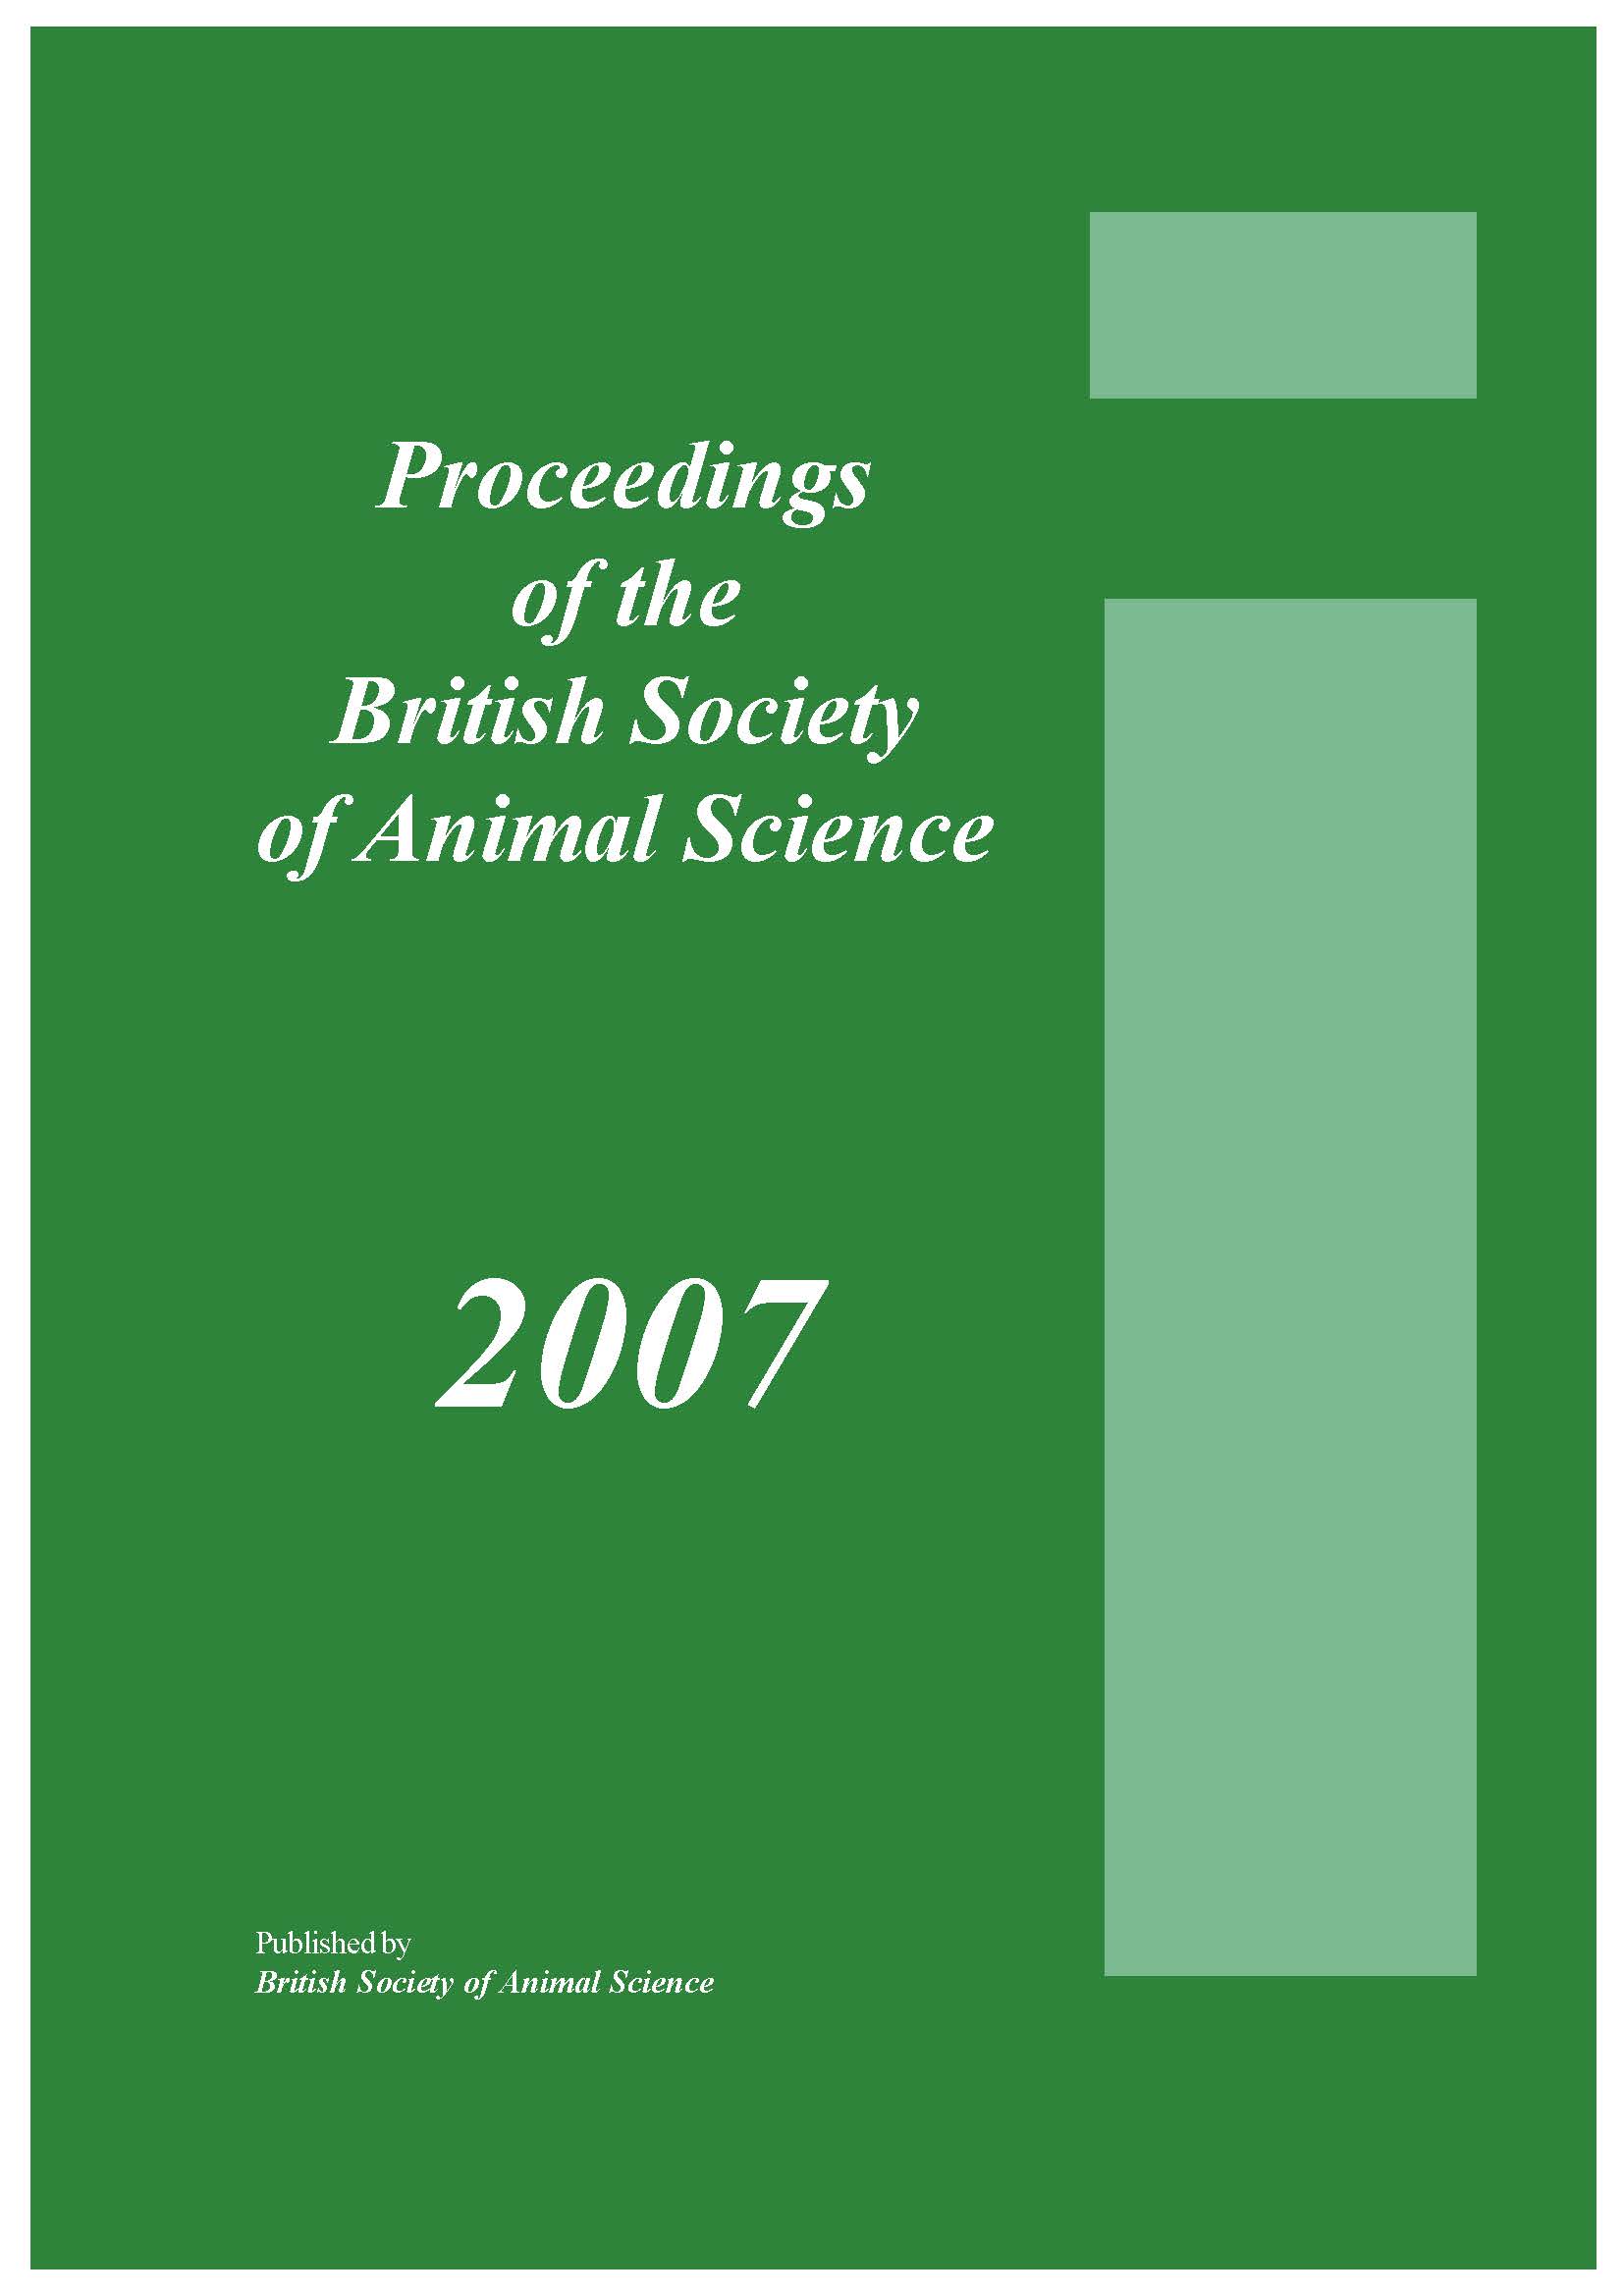 Proceedings of the British Society of Animal Science